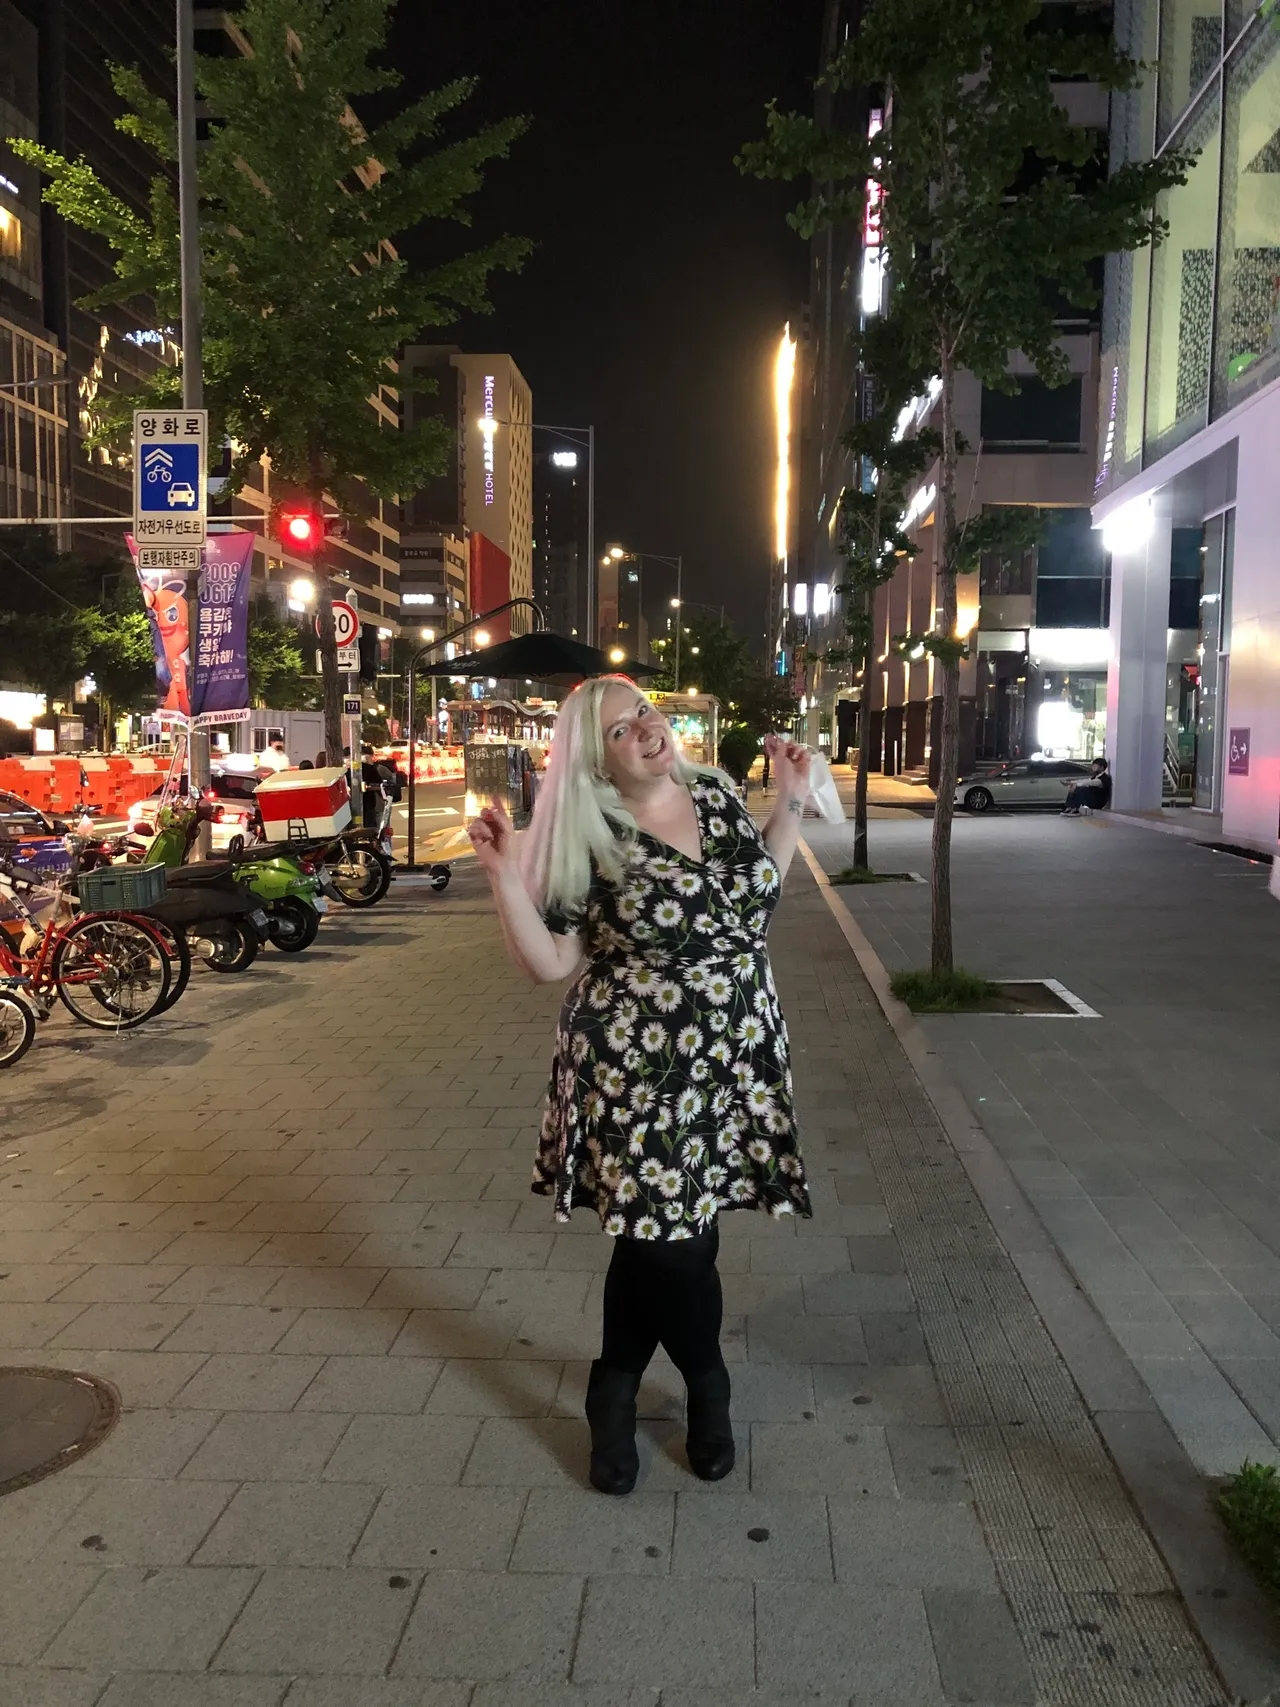 Seoul: The city that never sleeps The Travel Psychologist